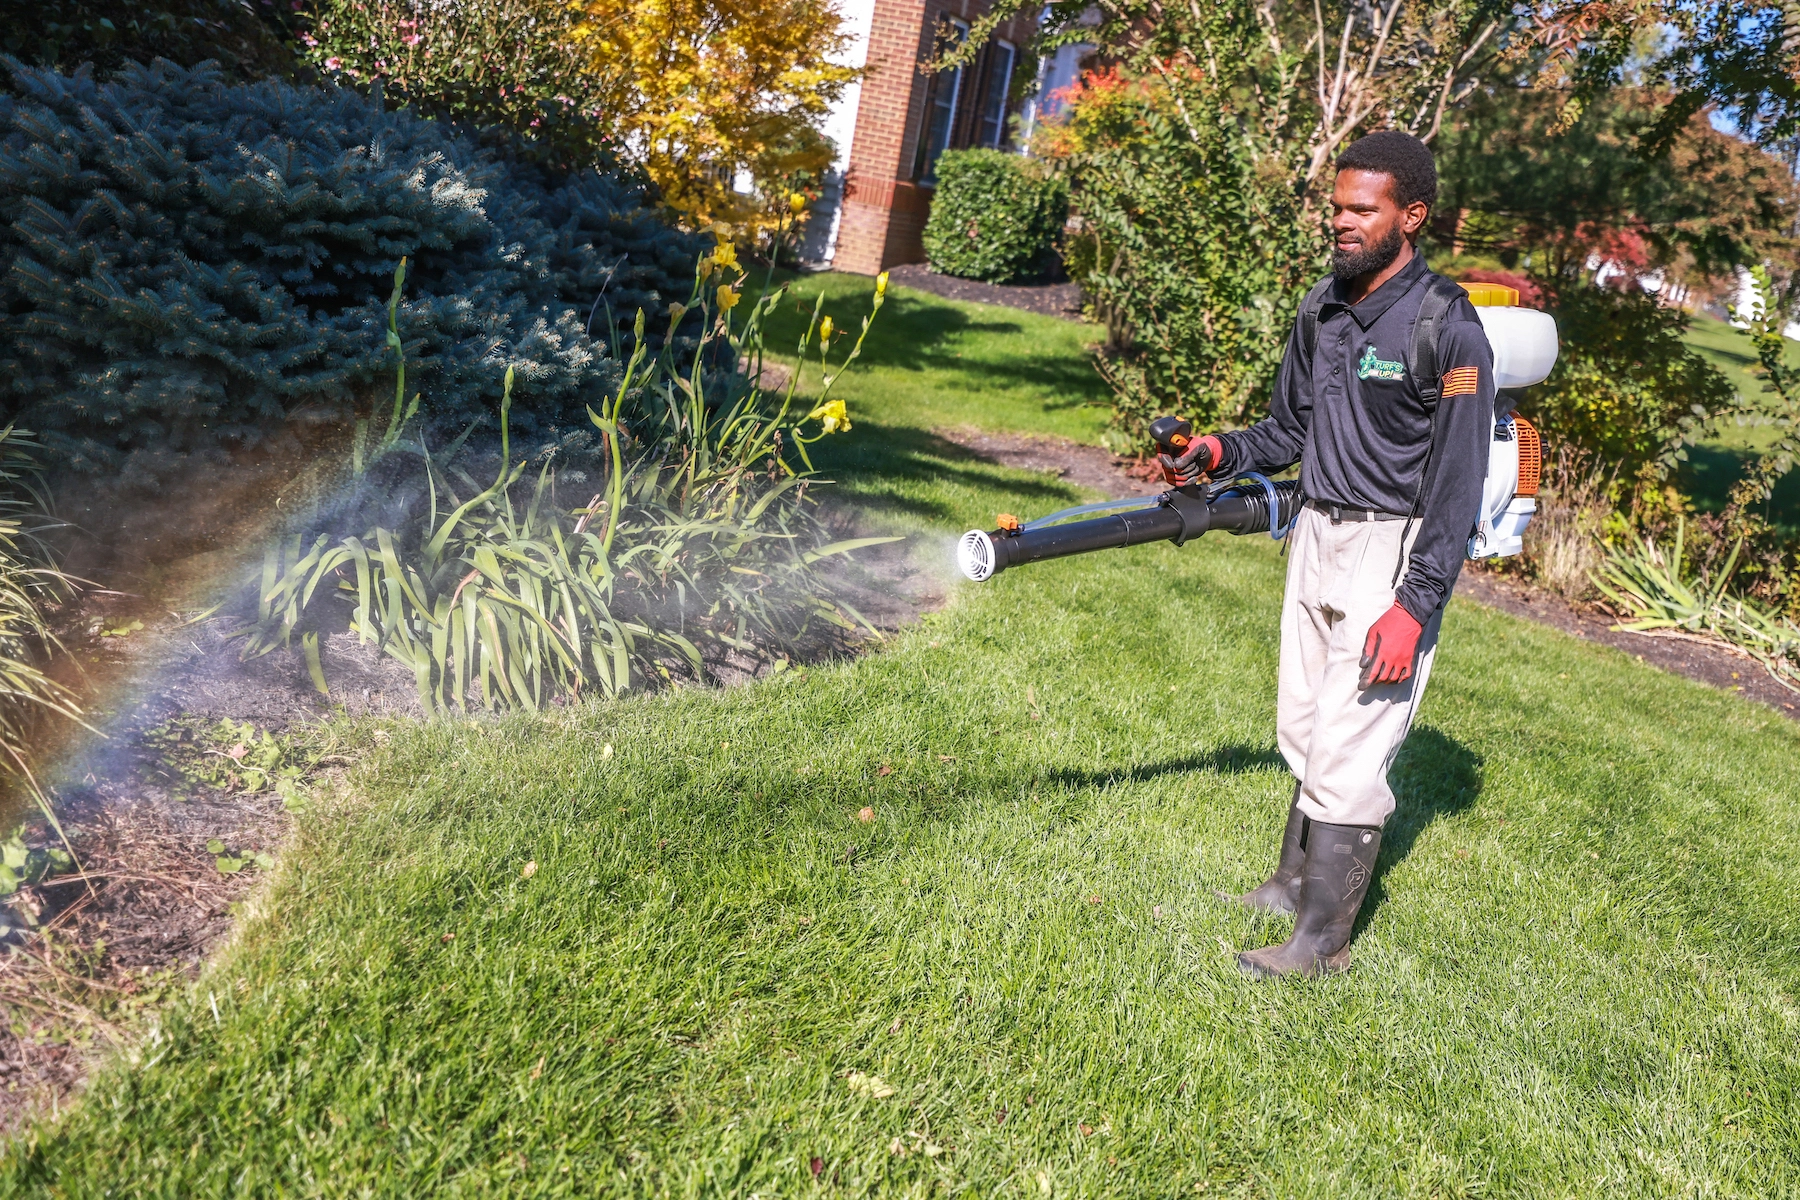 mosquito control technician spraying for mosquitoes